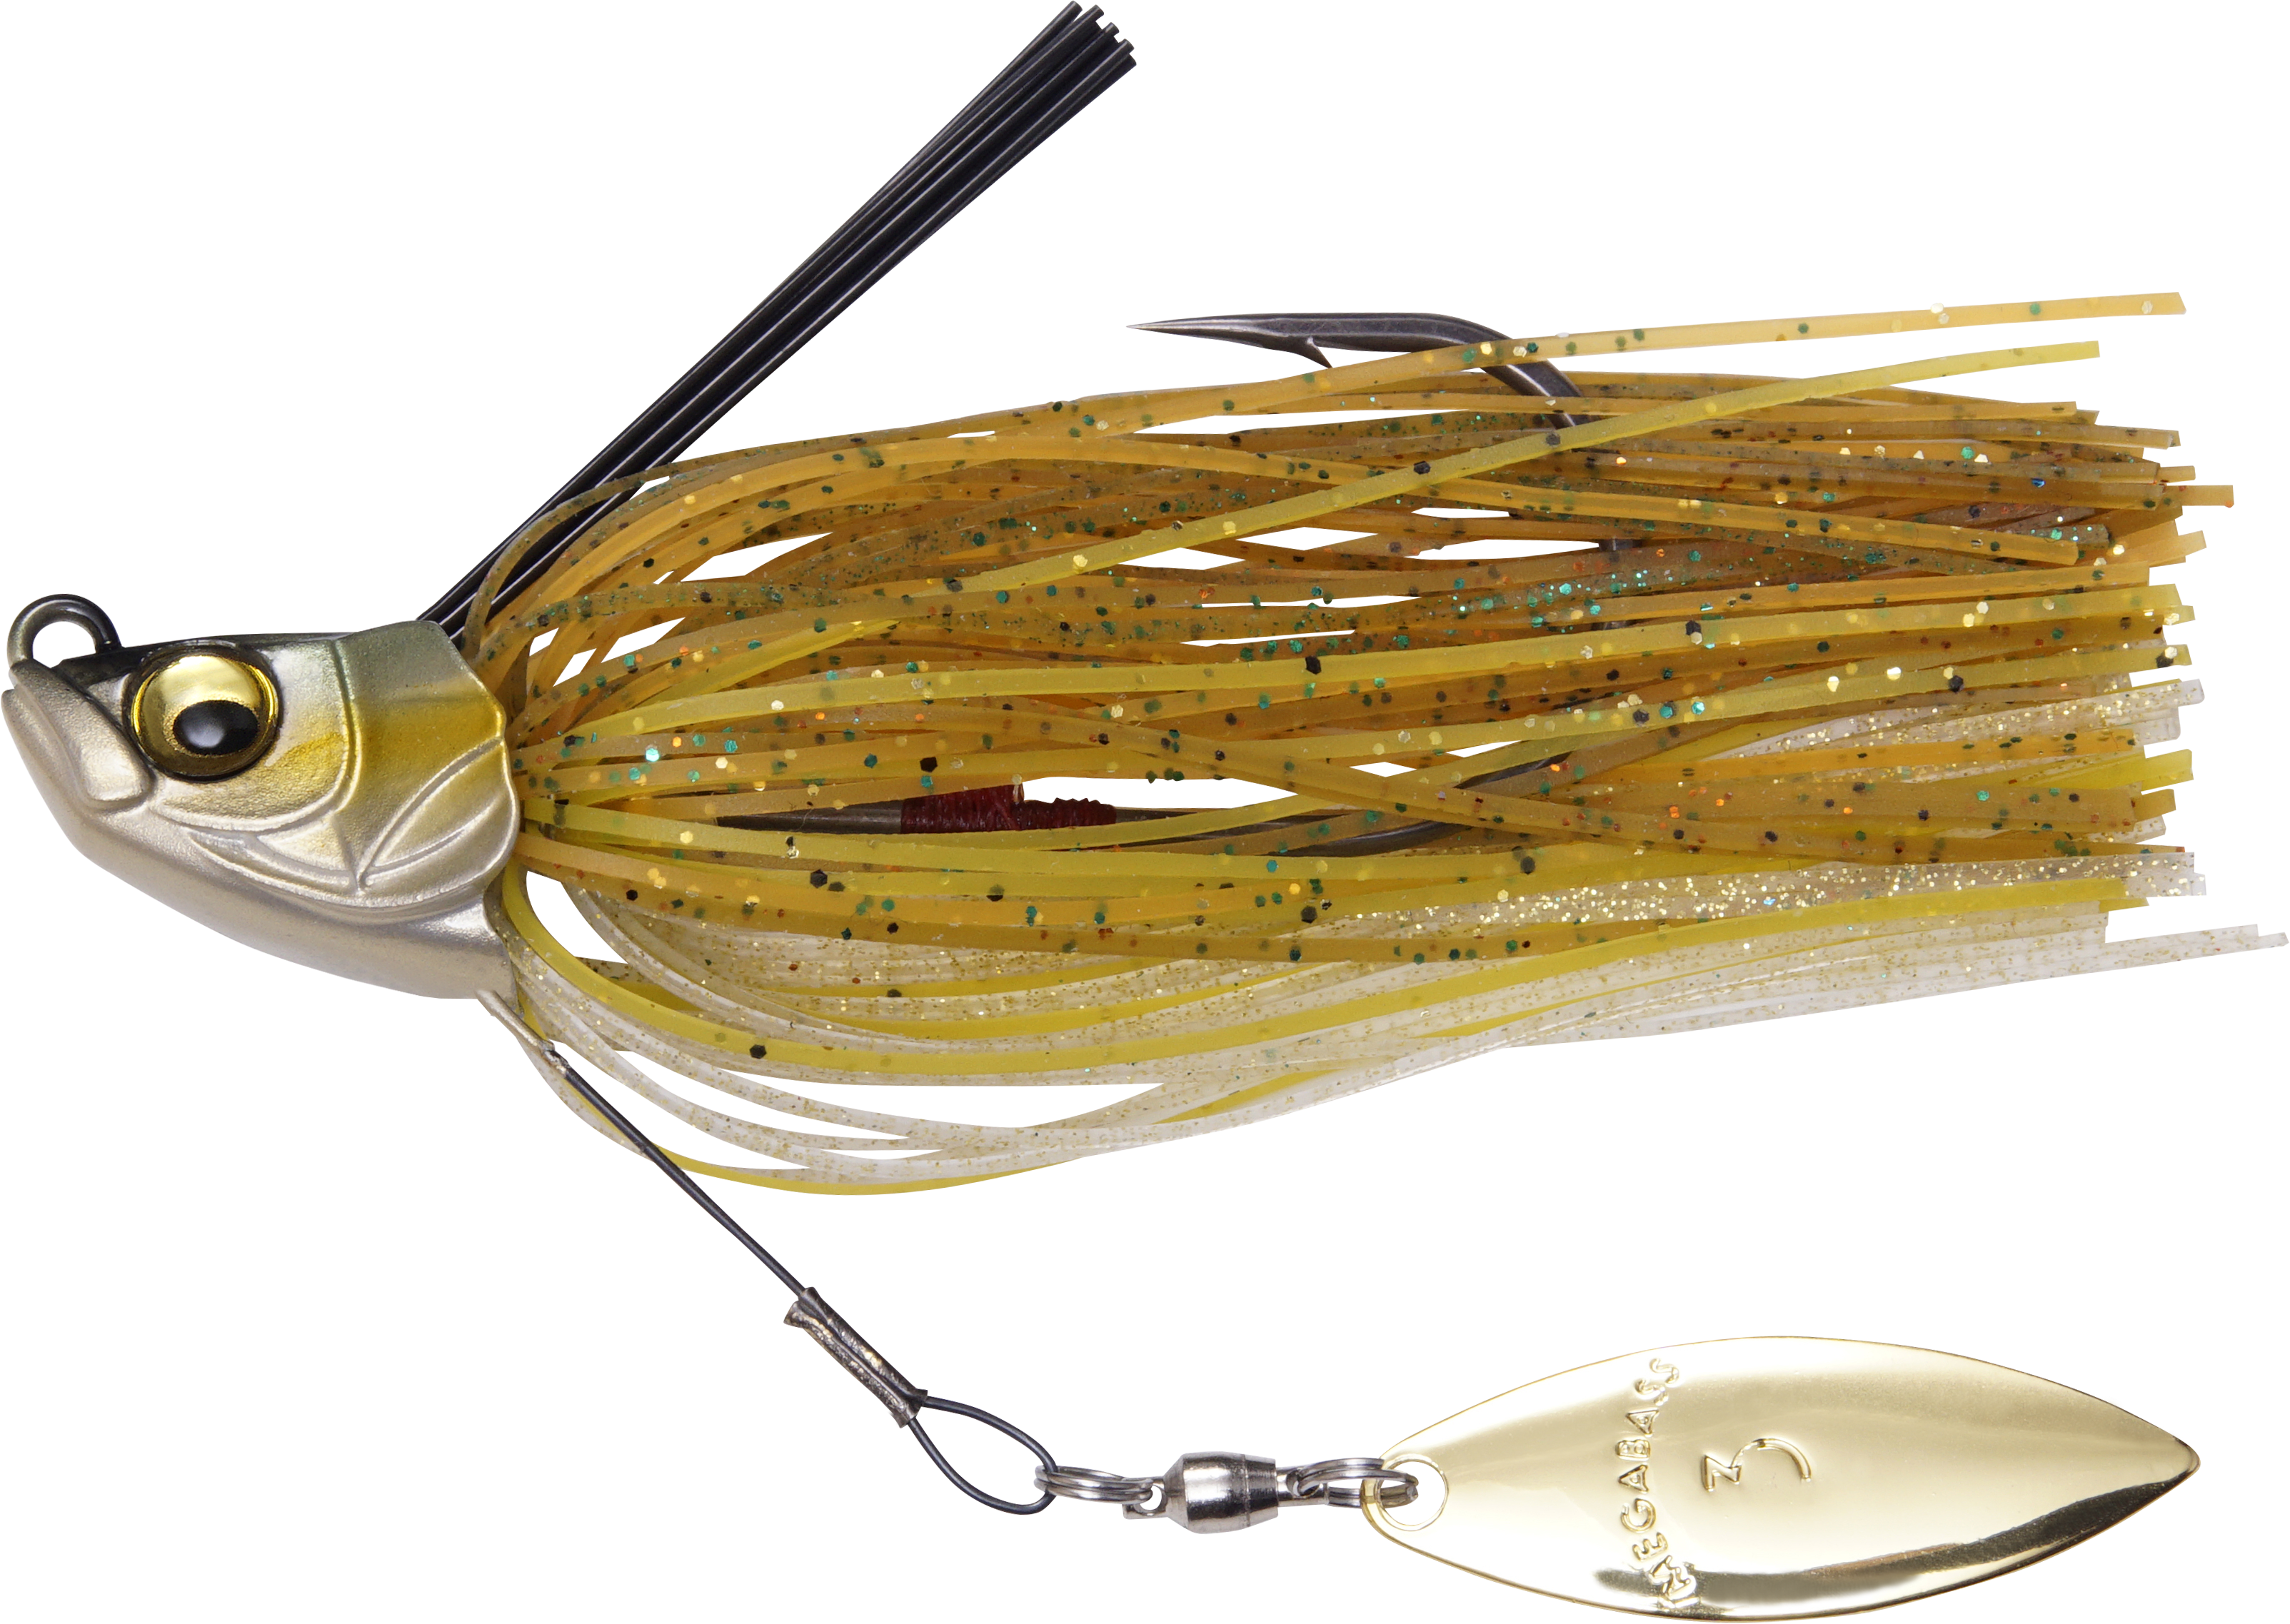 Select Size & Weight Owner Flashy Swimmer Gold Willow Blade Swimbait Hook 2/PK